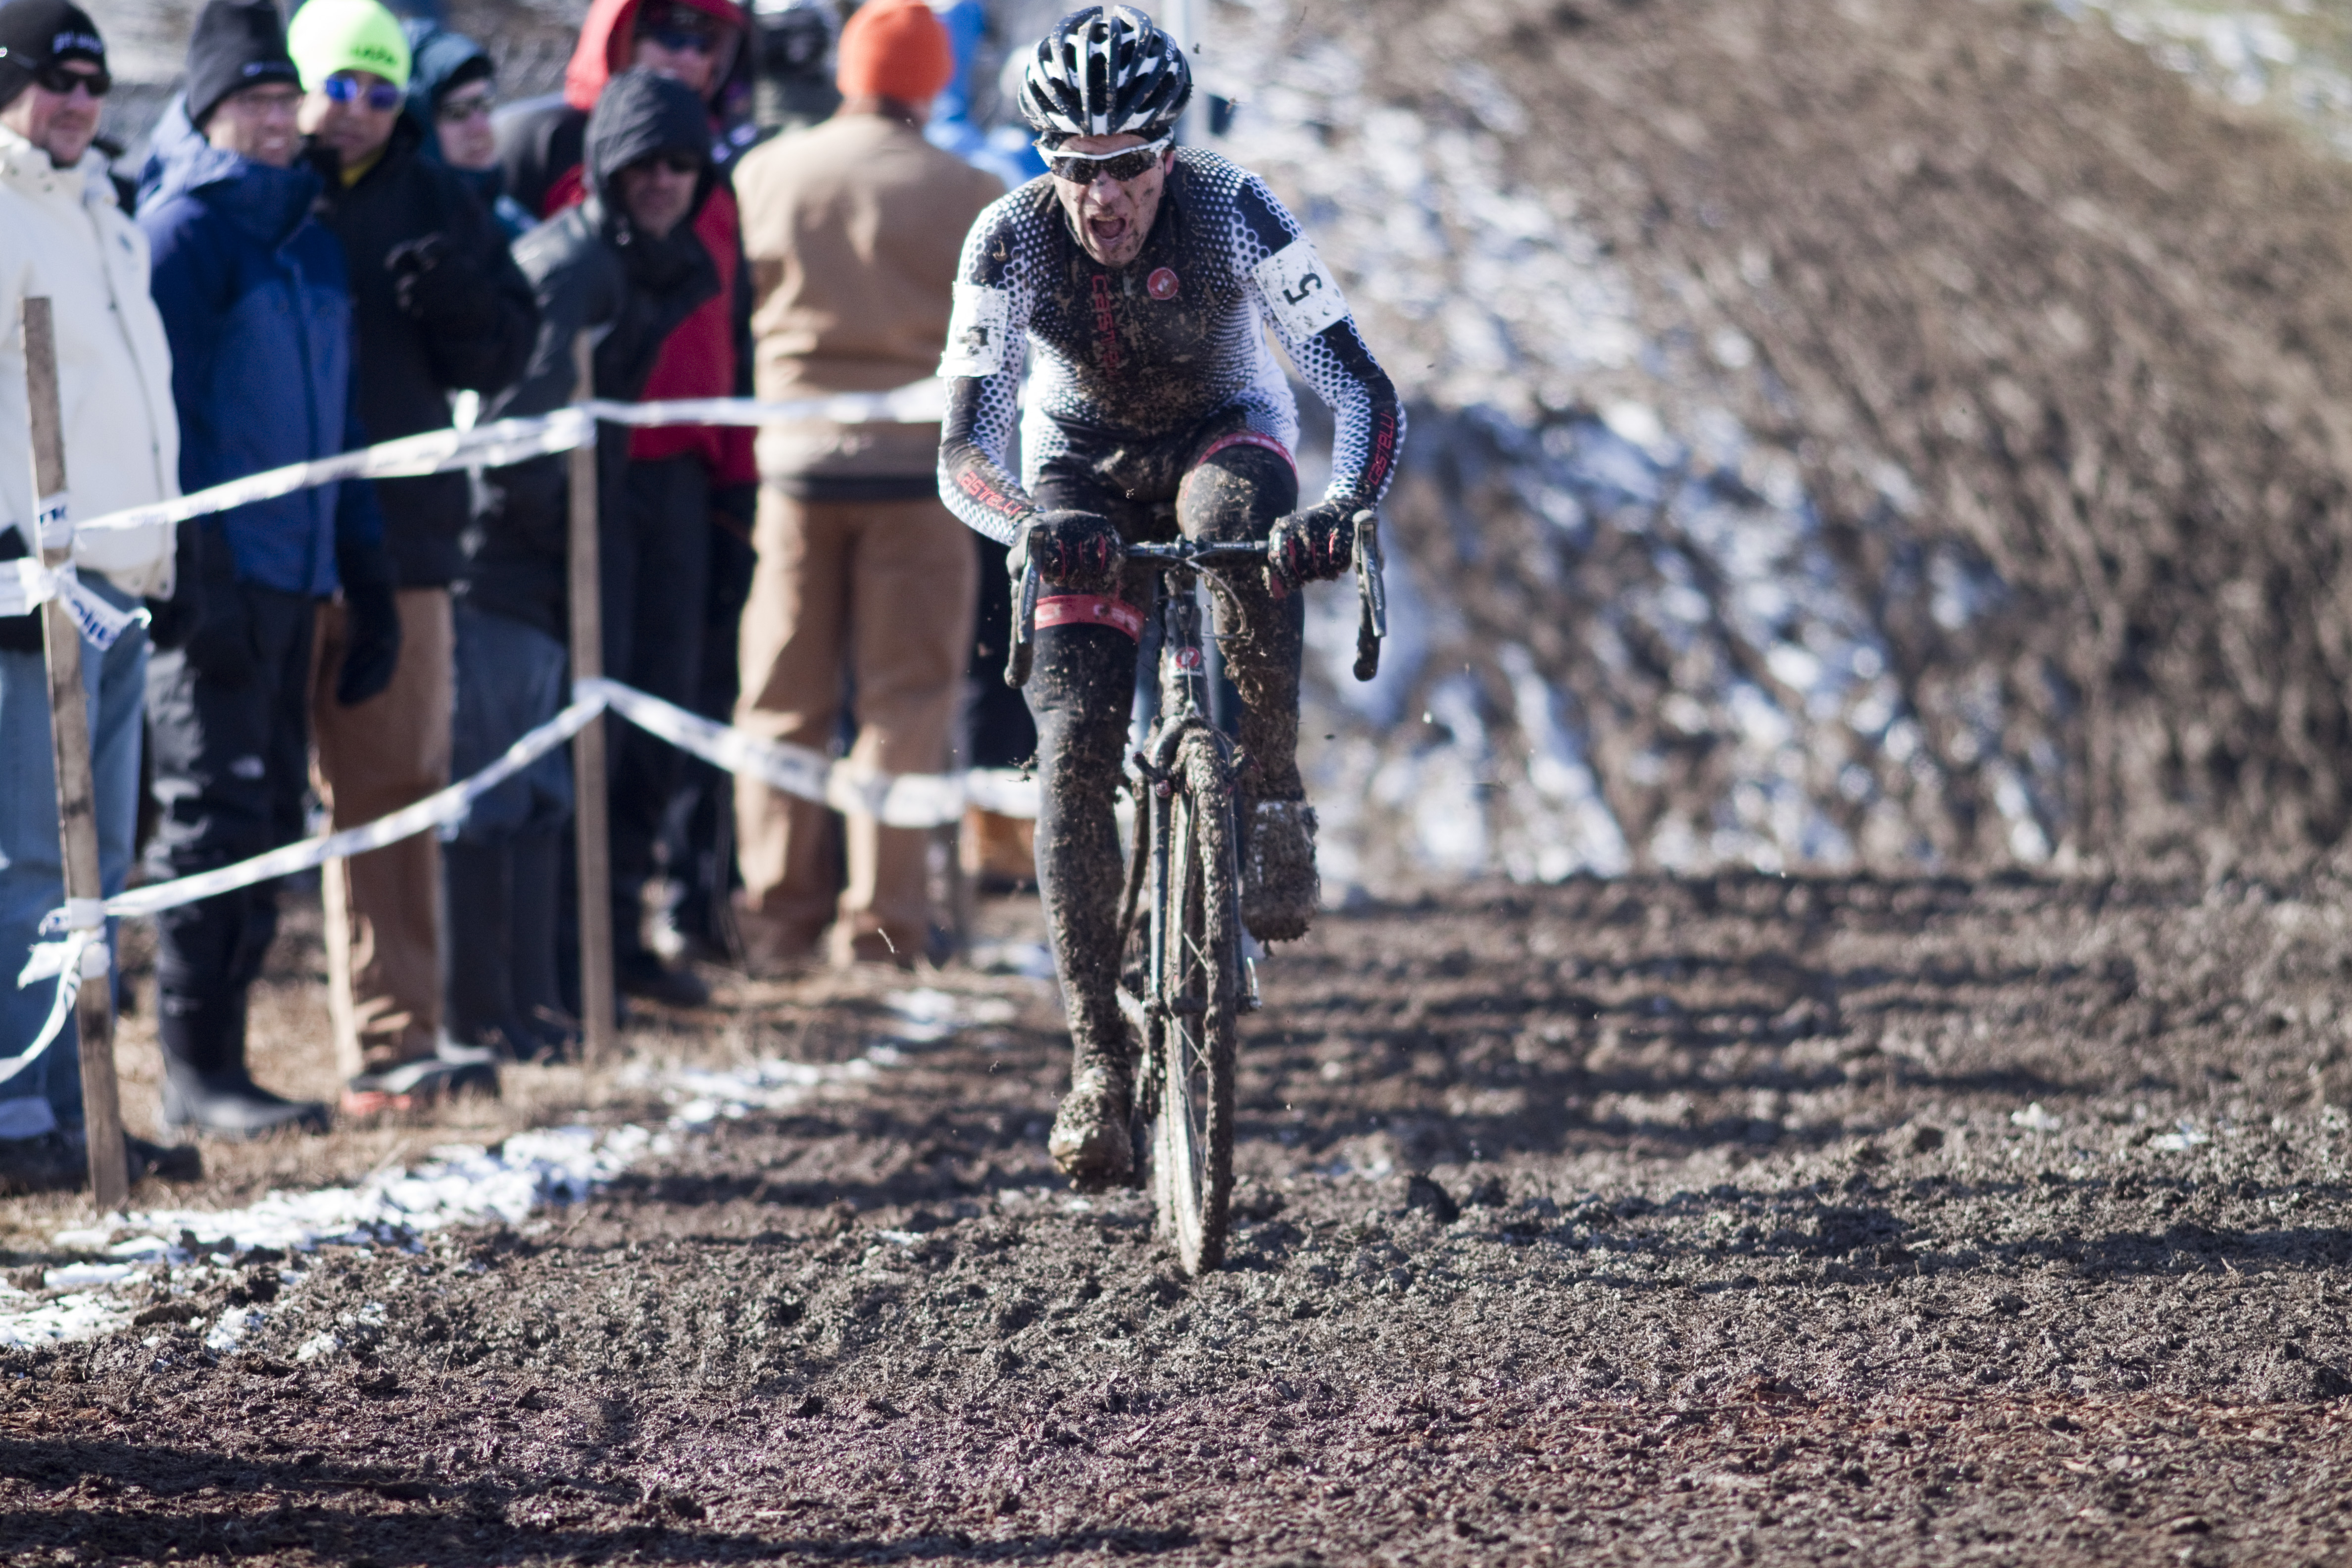 Mike Yozell had an amazing ride for second at 2013 Cyclocross World Championship Masters Men 40-44. © Cyclocross Magazine